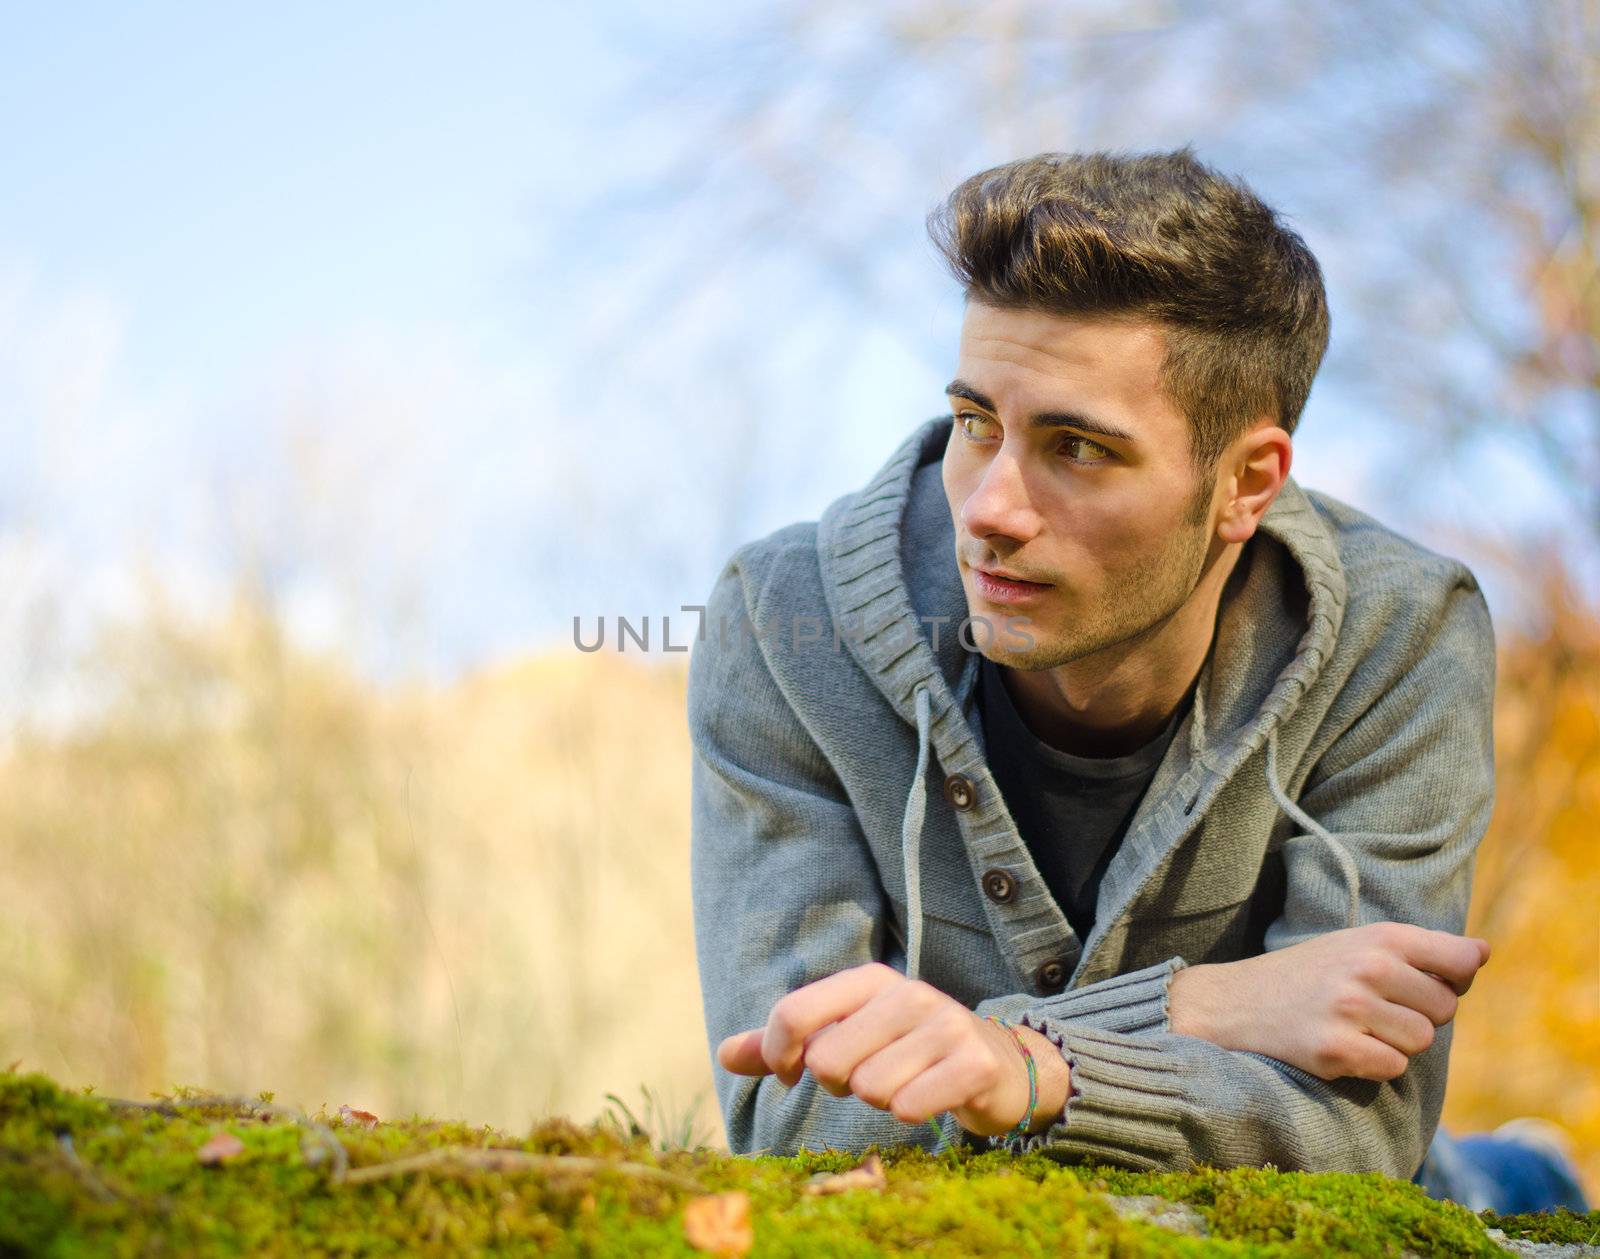 Handsome young man outdoors in nature lying on moss, large copyspace